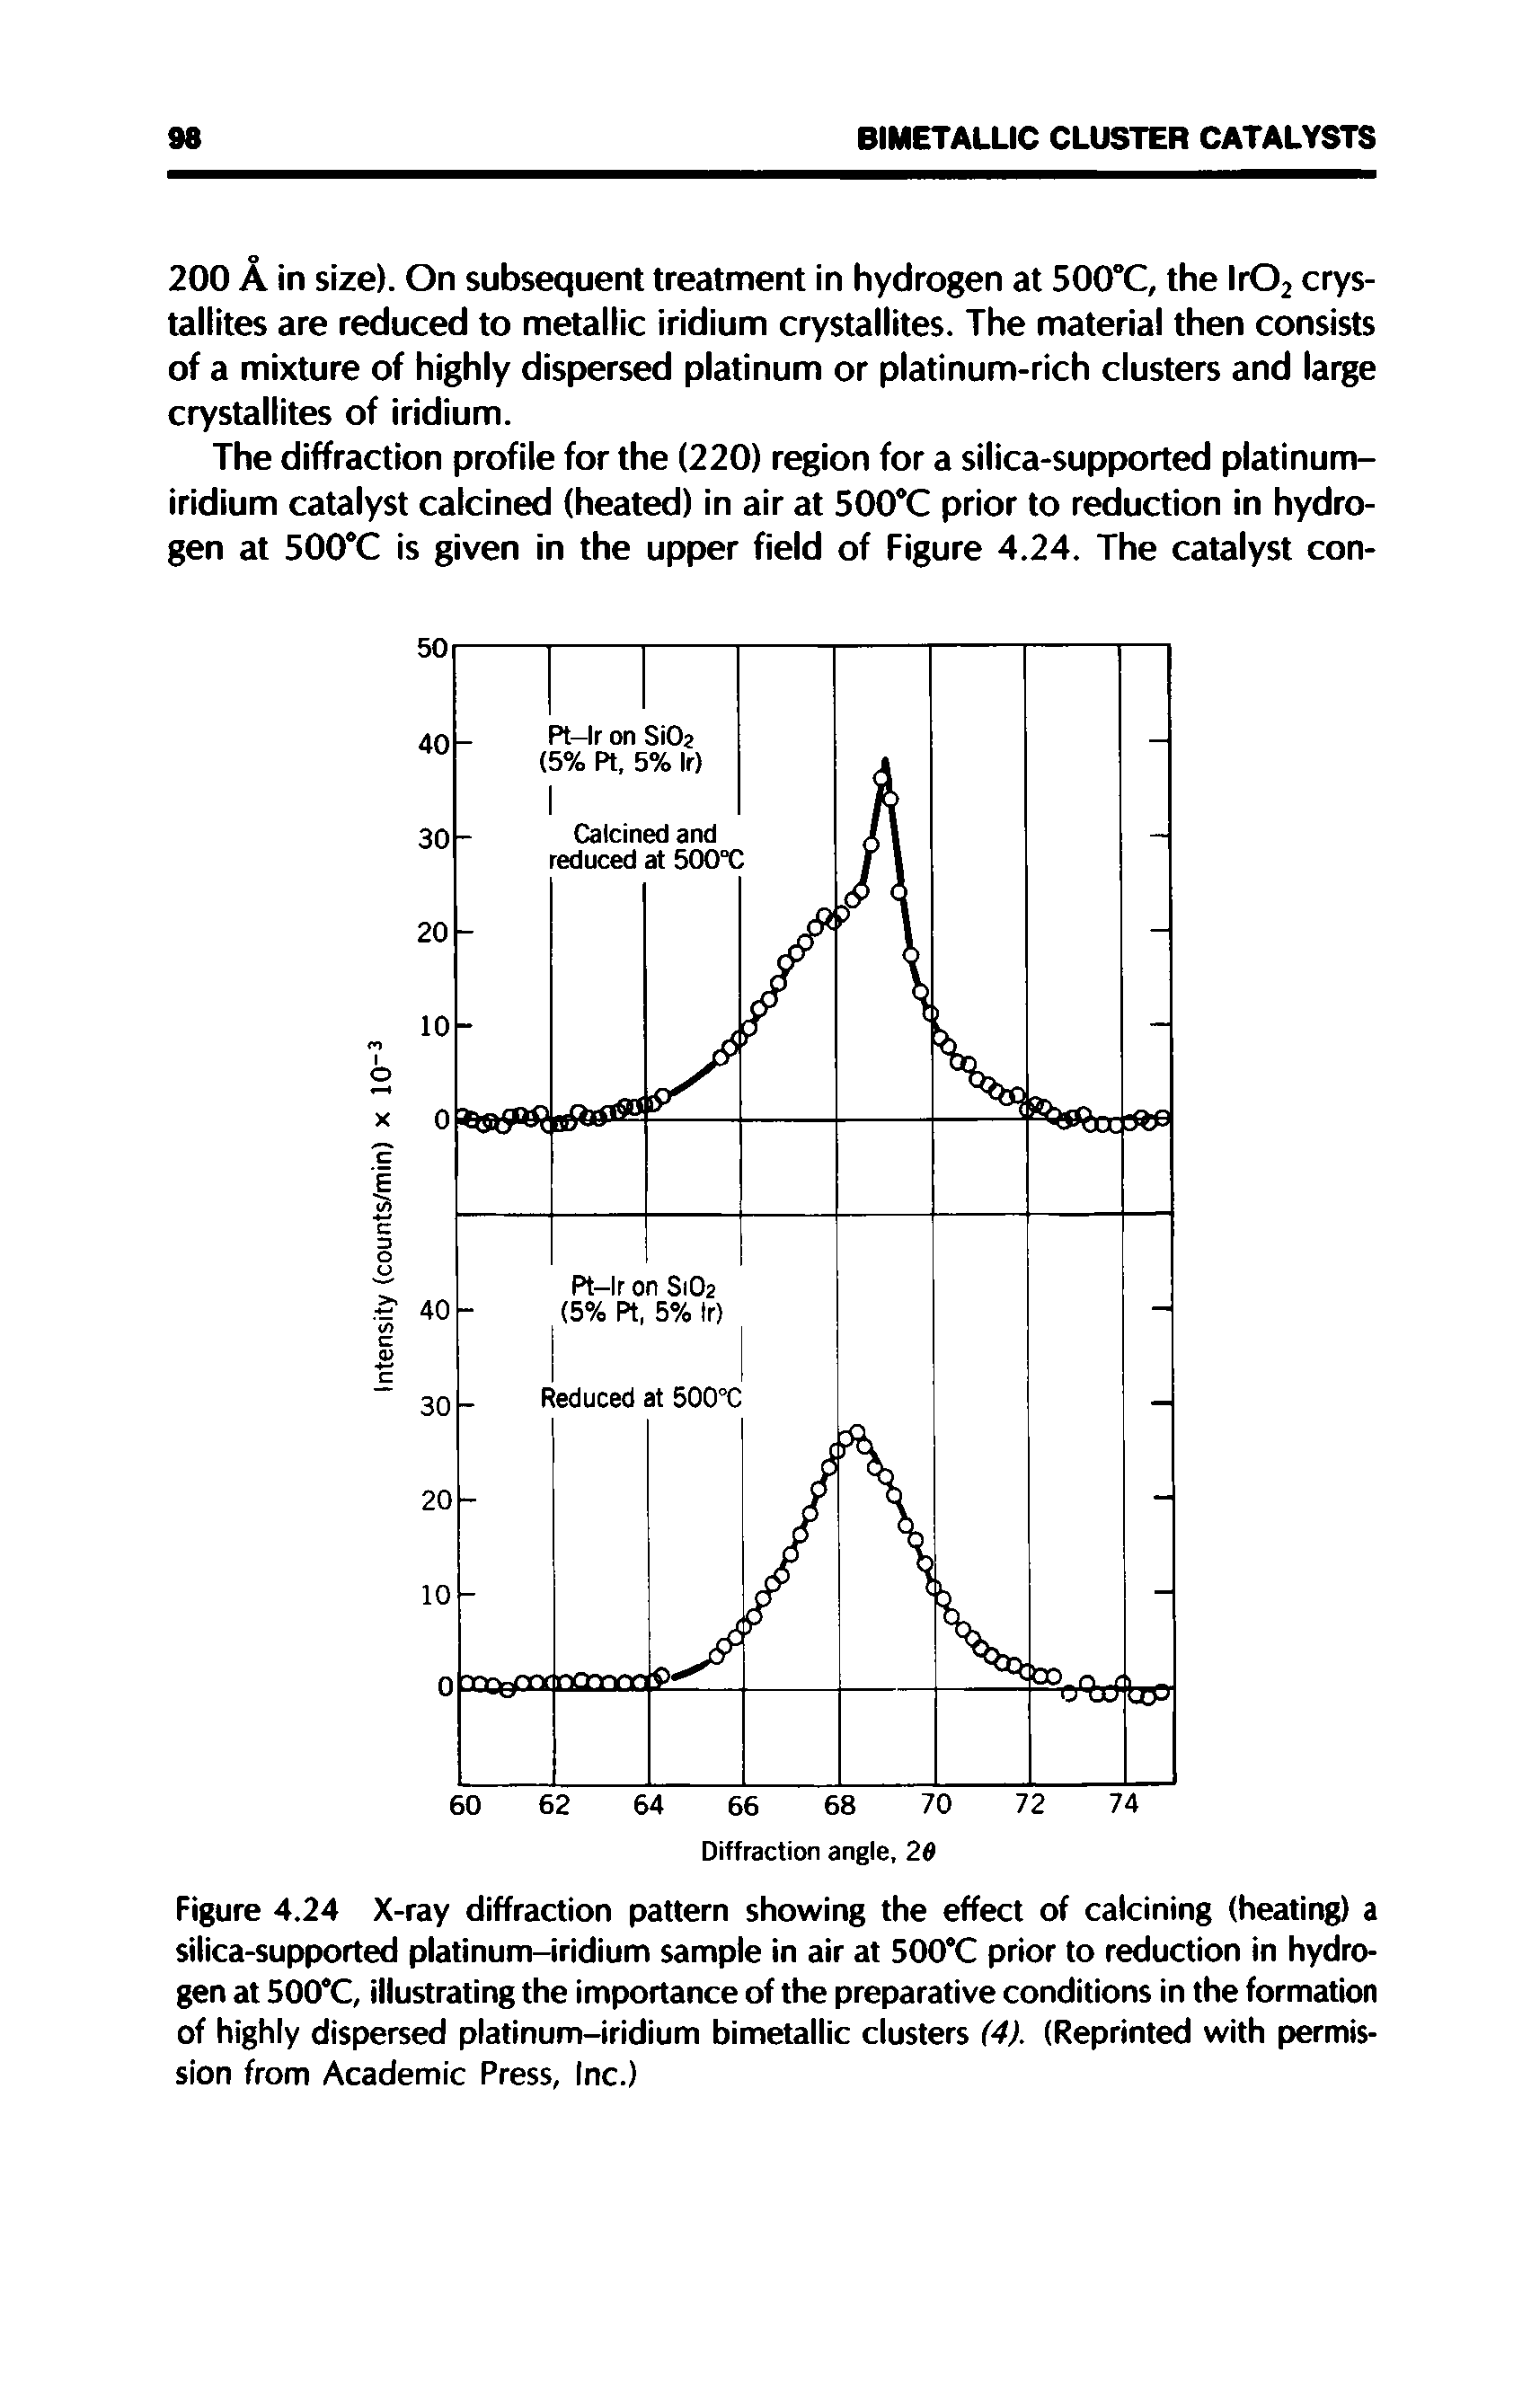 Figure 4.24 X-ray diffraction pattern showing the effect of calcining (heating) a silica-supported platinum-iridium sample in air at 500°C prior to reduction in hydrogen at 500°C, illustrating the importance of the preparative conditions in the formation of highly dispersed platinum-iridium bimetallic clusters (4). (Reprinted with permission from Academic Press, Inc.)...